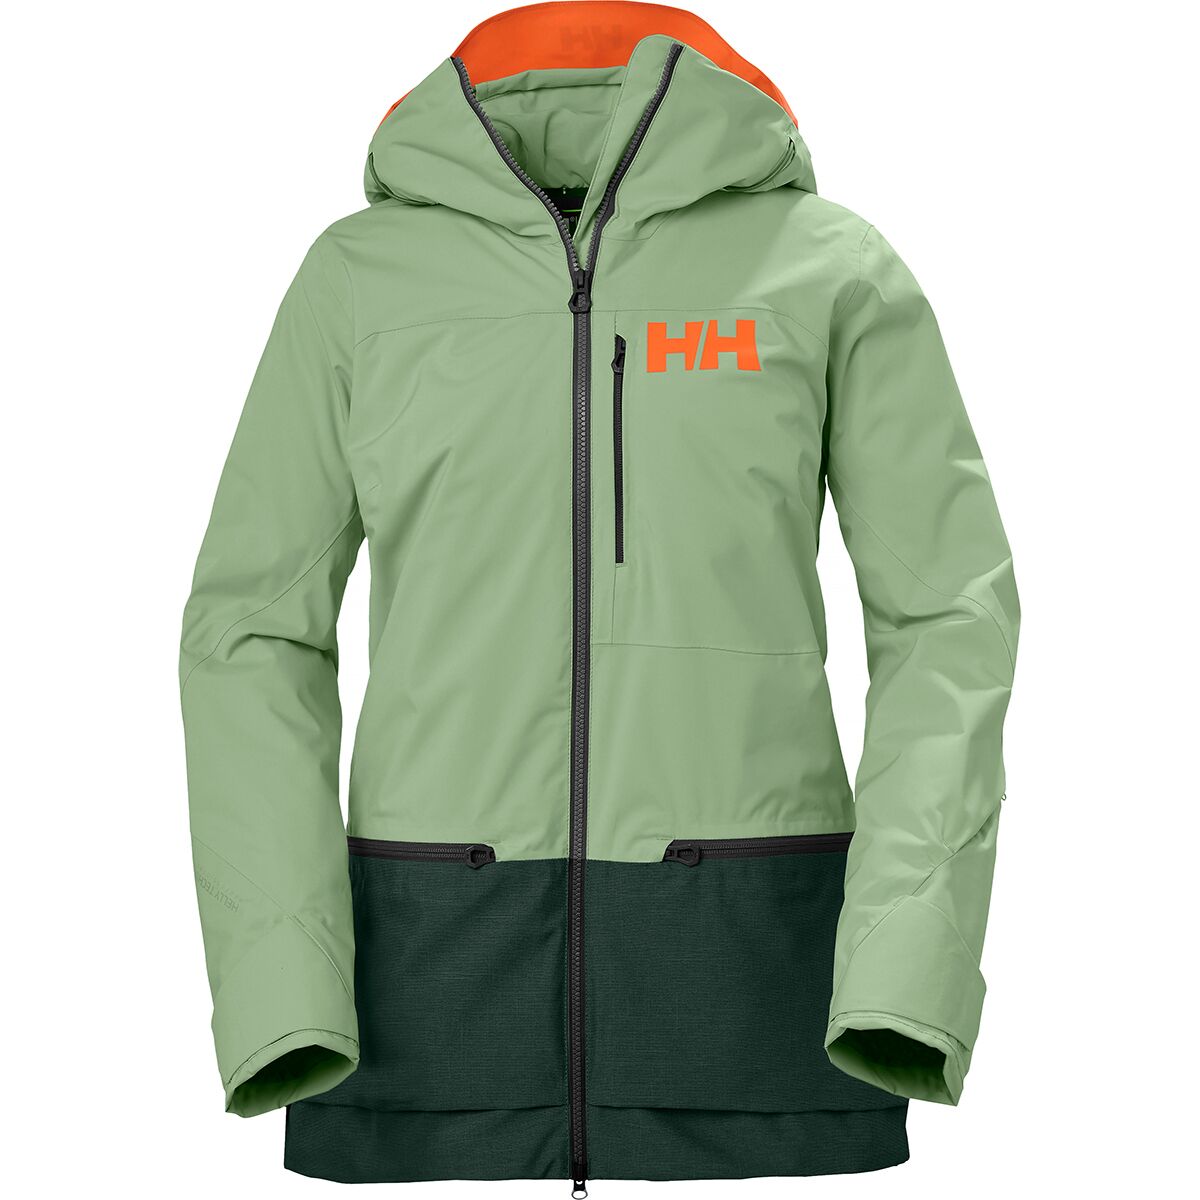 Helly - Jackets, Pants, & More